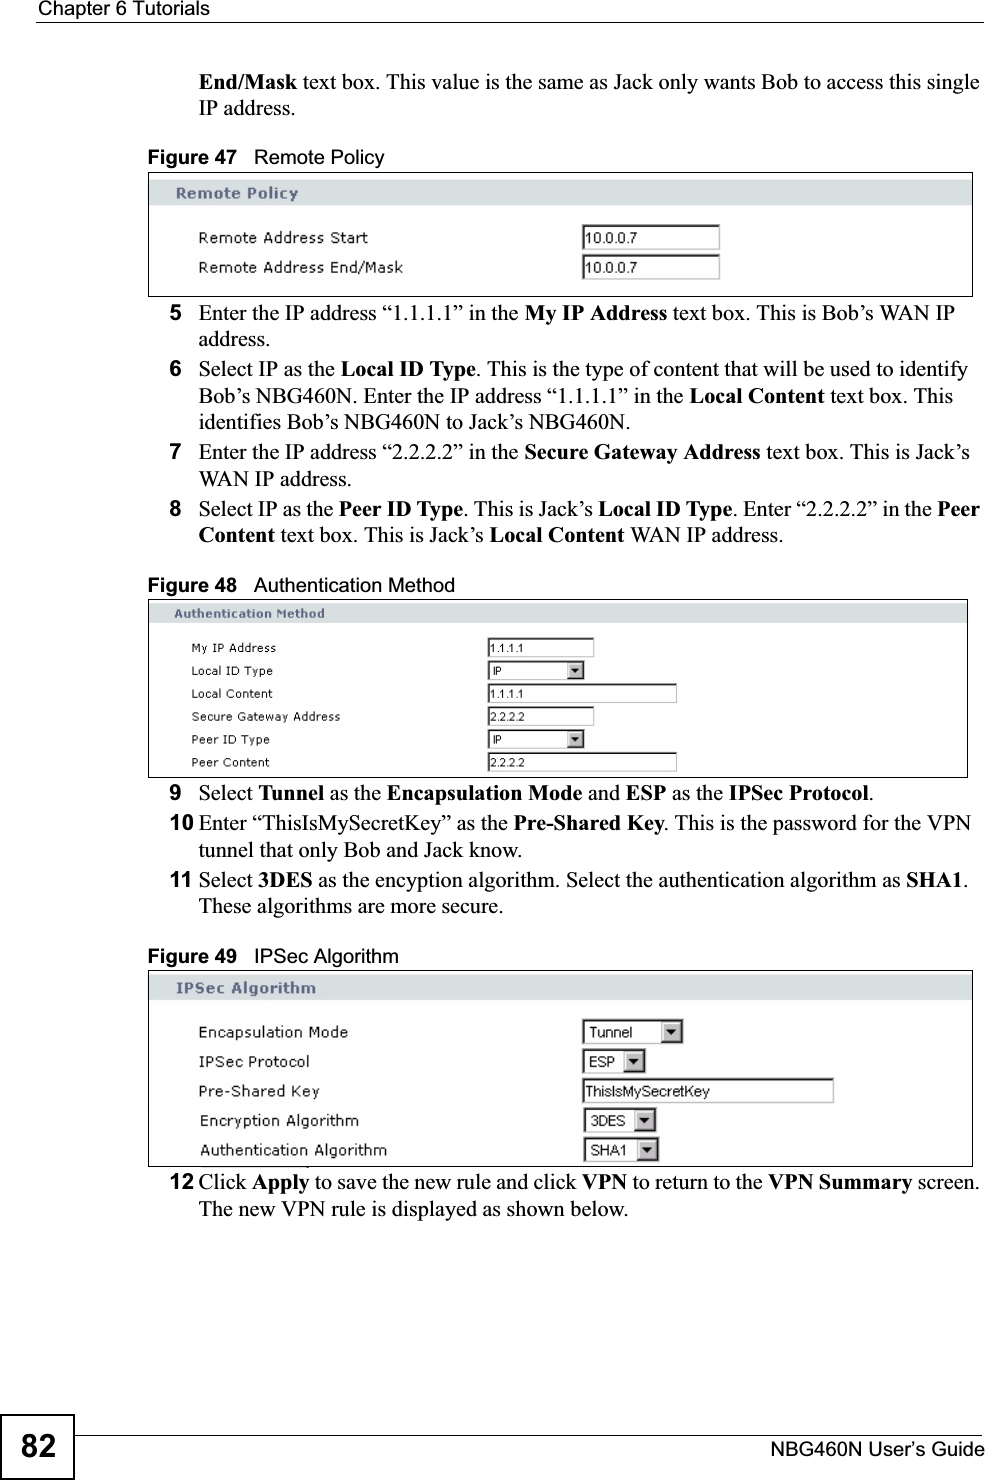 Chapter 6 TutorialsNBG460N User’s Guide82End/Mask text box. This value is the same as Jack only wants Bob to access this single IP address.Figure 47   Remote Policy5Enter the IP address “1.1.1.1” in the My IP Address text box. This is Bob’s WAN IP address.6Select IP as the Local ID Type. This is the type of content that will be used to identify Bob’s NBG460N. Enter the IP address “1.1.1.1” in the Local Content text box. This identifies Bob’s NBG460N to Jack’s NBG460N.7Enter the IP address “2.2.2.2” in the Secure Gateway Address text box. This is Jack’s WAN IP address.8Select IP as the Peer ID Type. This is Jack’s Local ID Type. Enter “2.2.2.2” in the Peer Content text box. This is Jack’s Local Content WAN IP address.Figure 48   Authentication Method9Select Tunnel as the Encapsulation Mode and ESP as the IPSec Protocol.10 Enter “ThisIsMySecretKey” as the Pre-Shared Key. This is the password for the VPN tunnel that only Bob and Jack know.11 Select 3DES as the encyption algorithm. Select the authentication algorithm as SHA1.These algorithms are more secure.Figure 49   IPSec Algorithm12 Click Apply to save the new rule and click VPN to return to the VPN Summary screen. The new VPN rule is displayed as shown below.